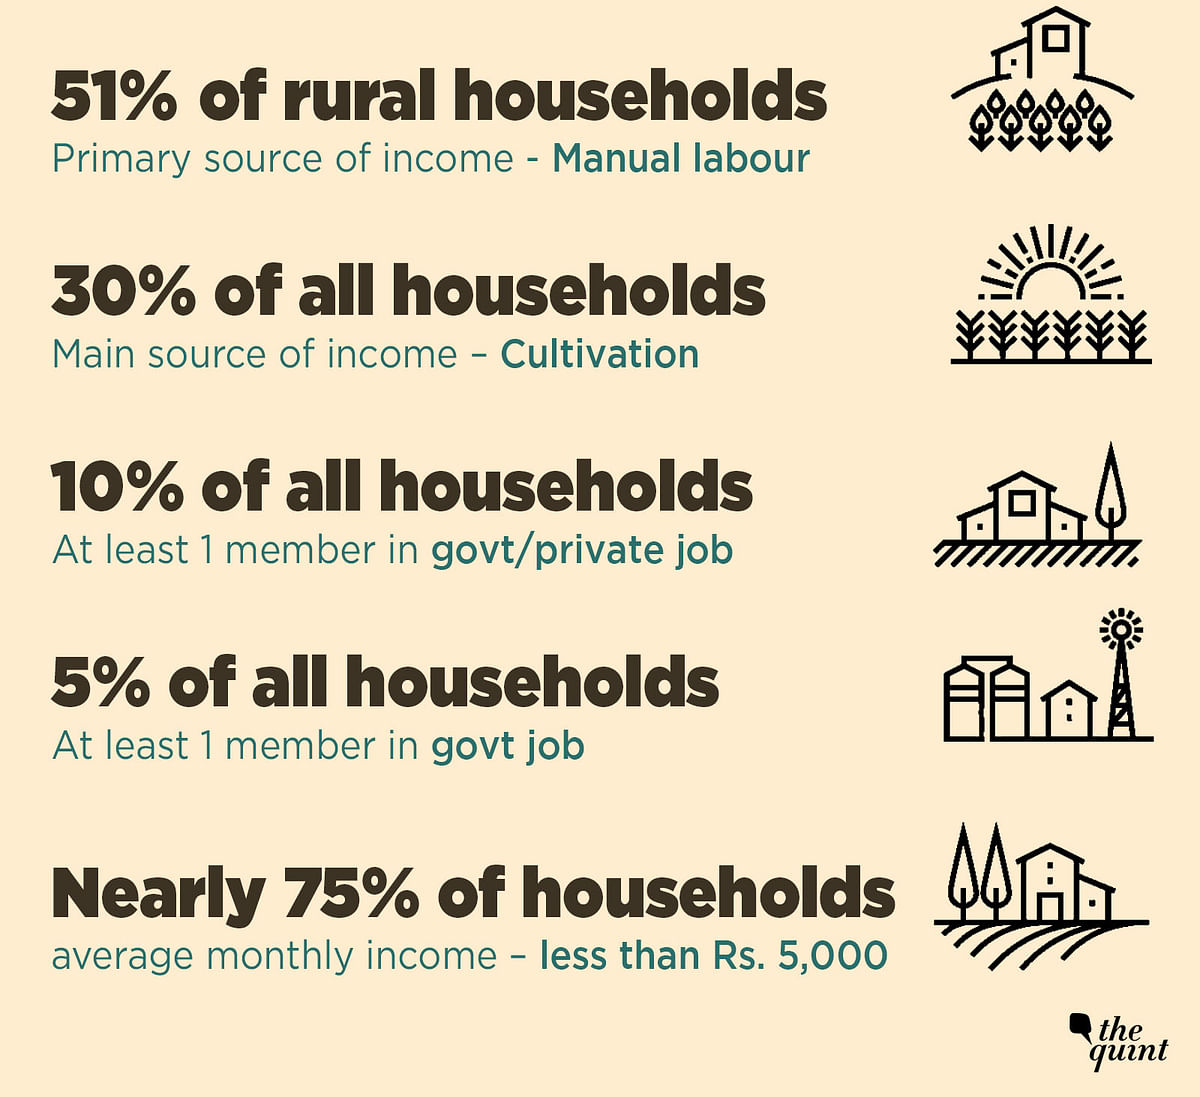 Rural consumption has grown unabated, while the income level has failed to keep pace  resulting in a debt trap.